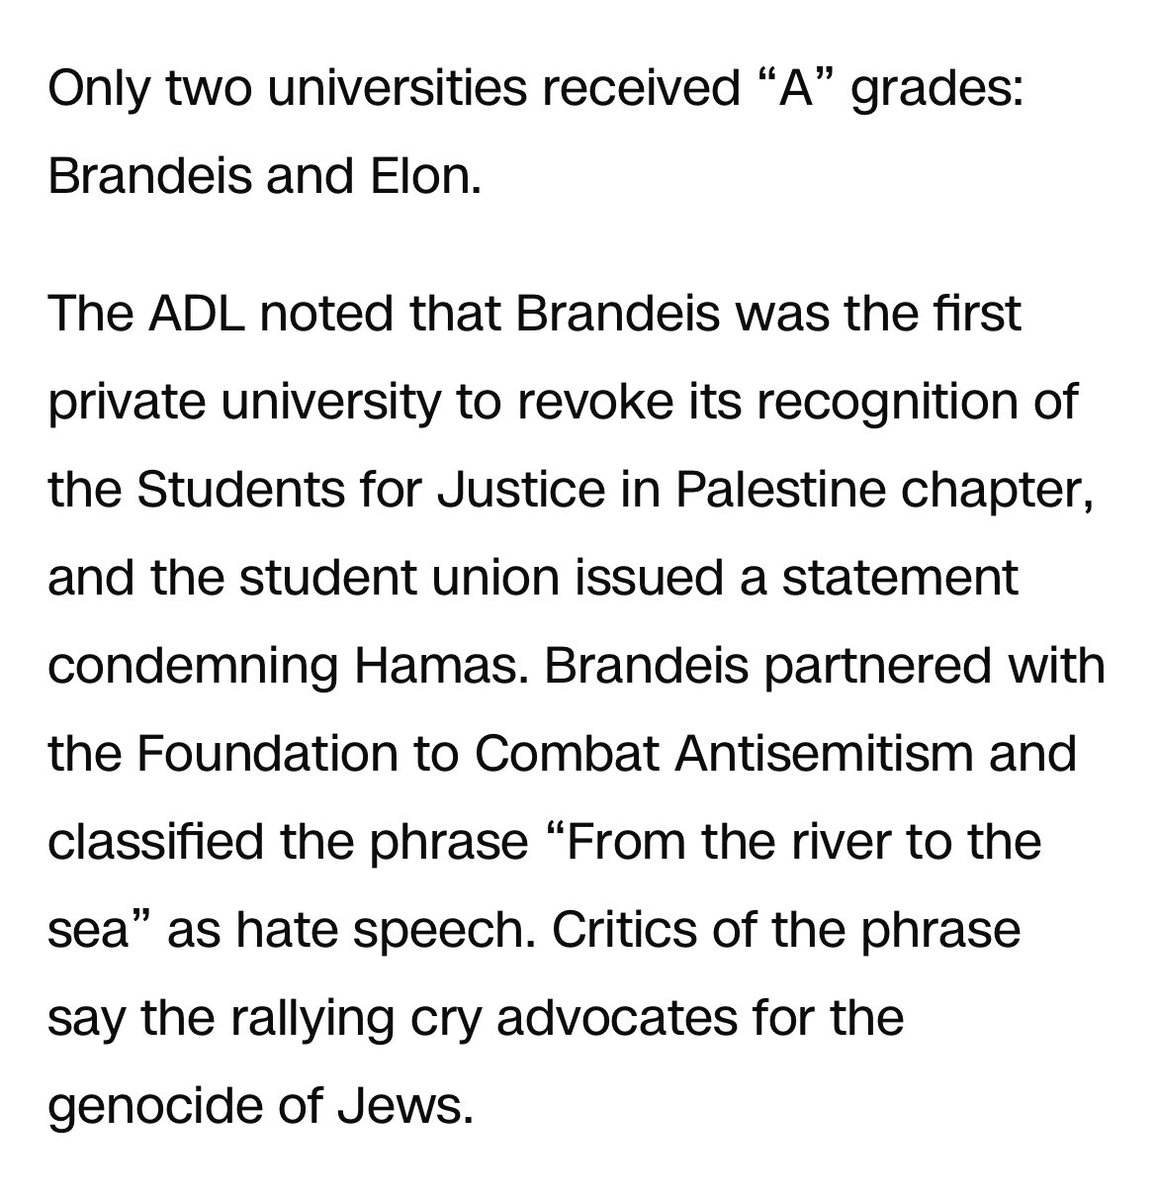 so this is how you get top marks from the ADL — try to silence any campus criticism of Israel: